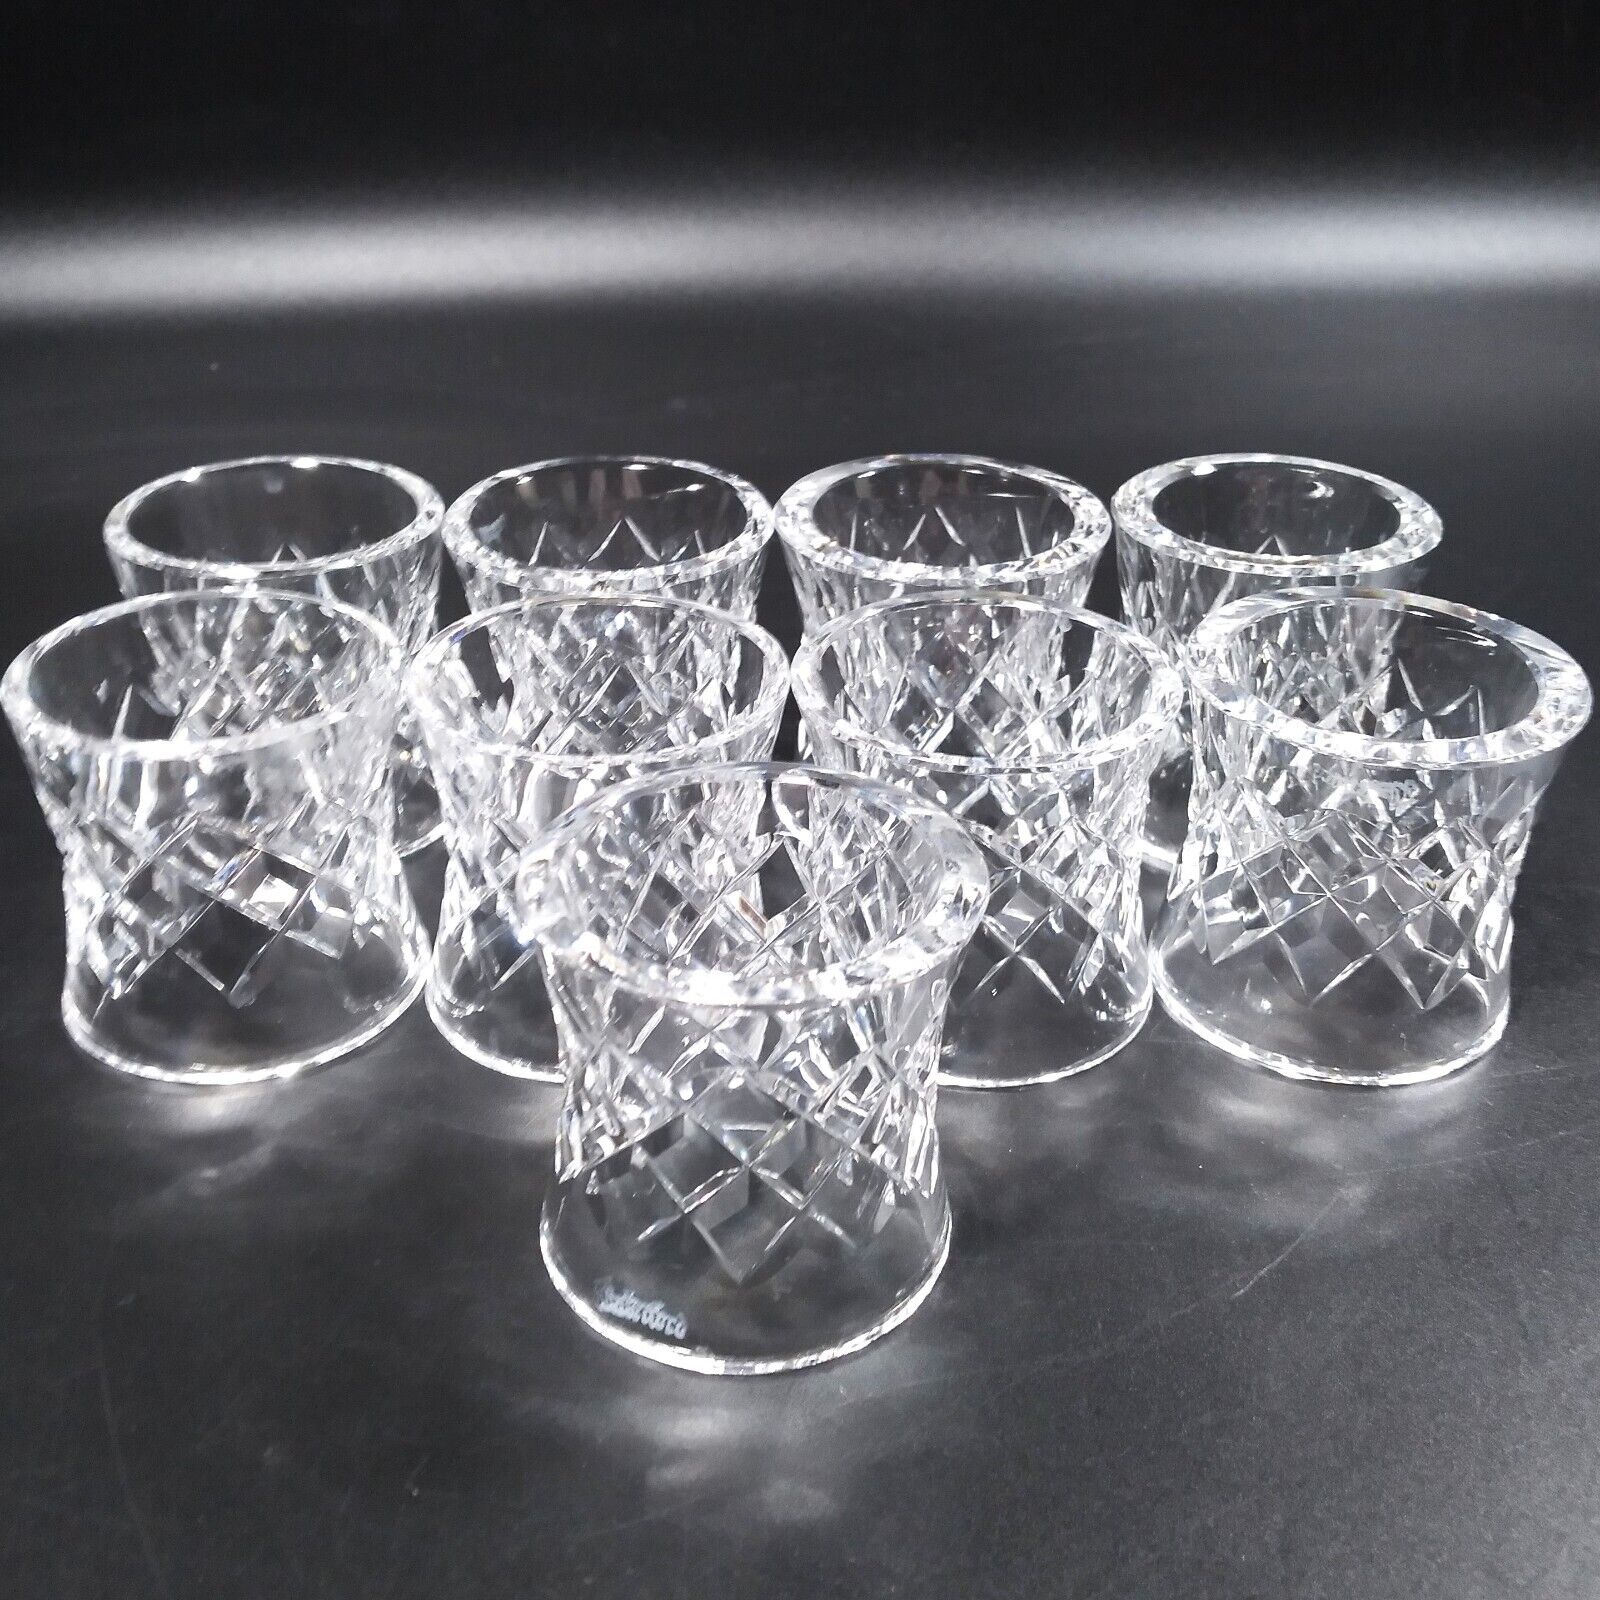 Set Of 9 Waterford Clear Crystal Comeragh Round Napkin Rings Criss Cross 2